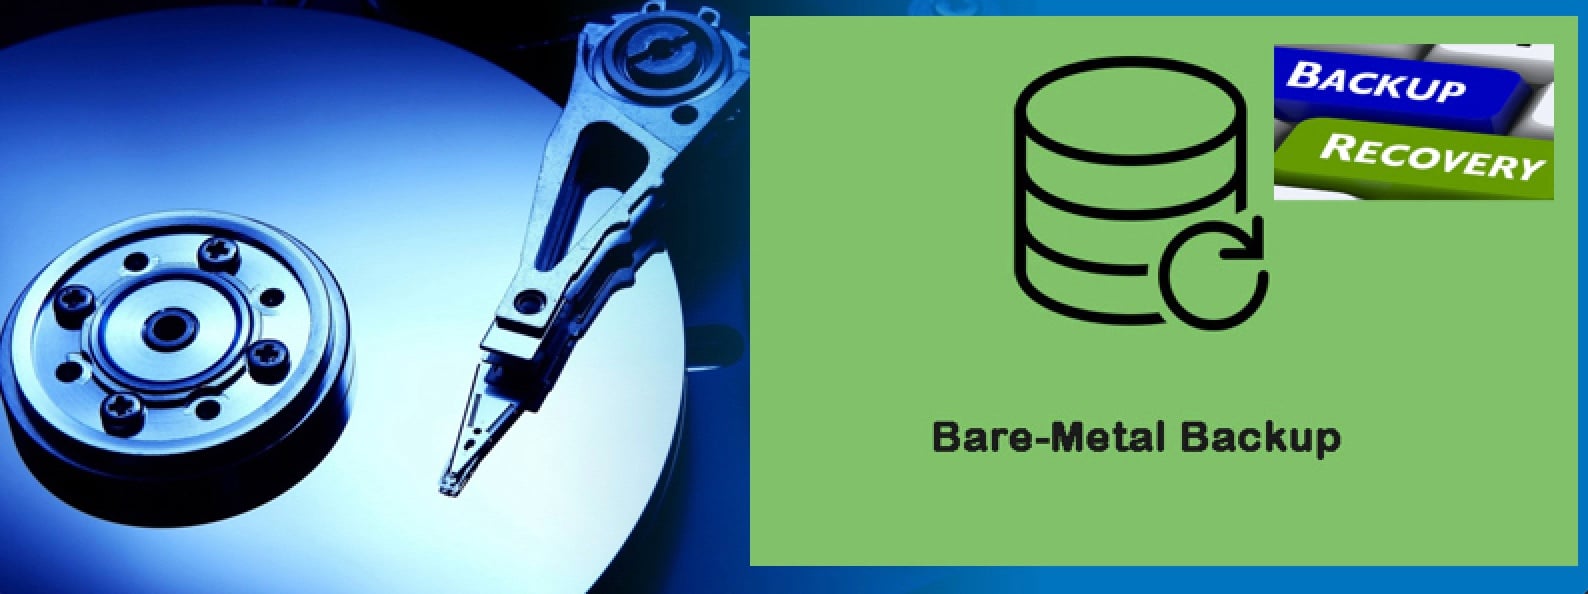 iperius backup bare metal recovery